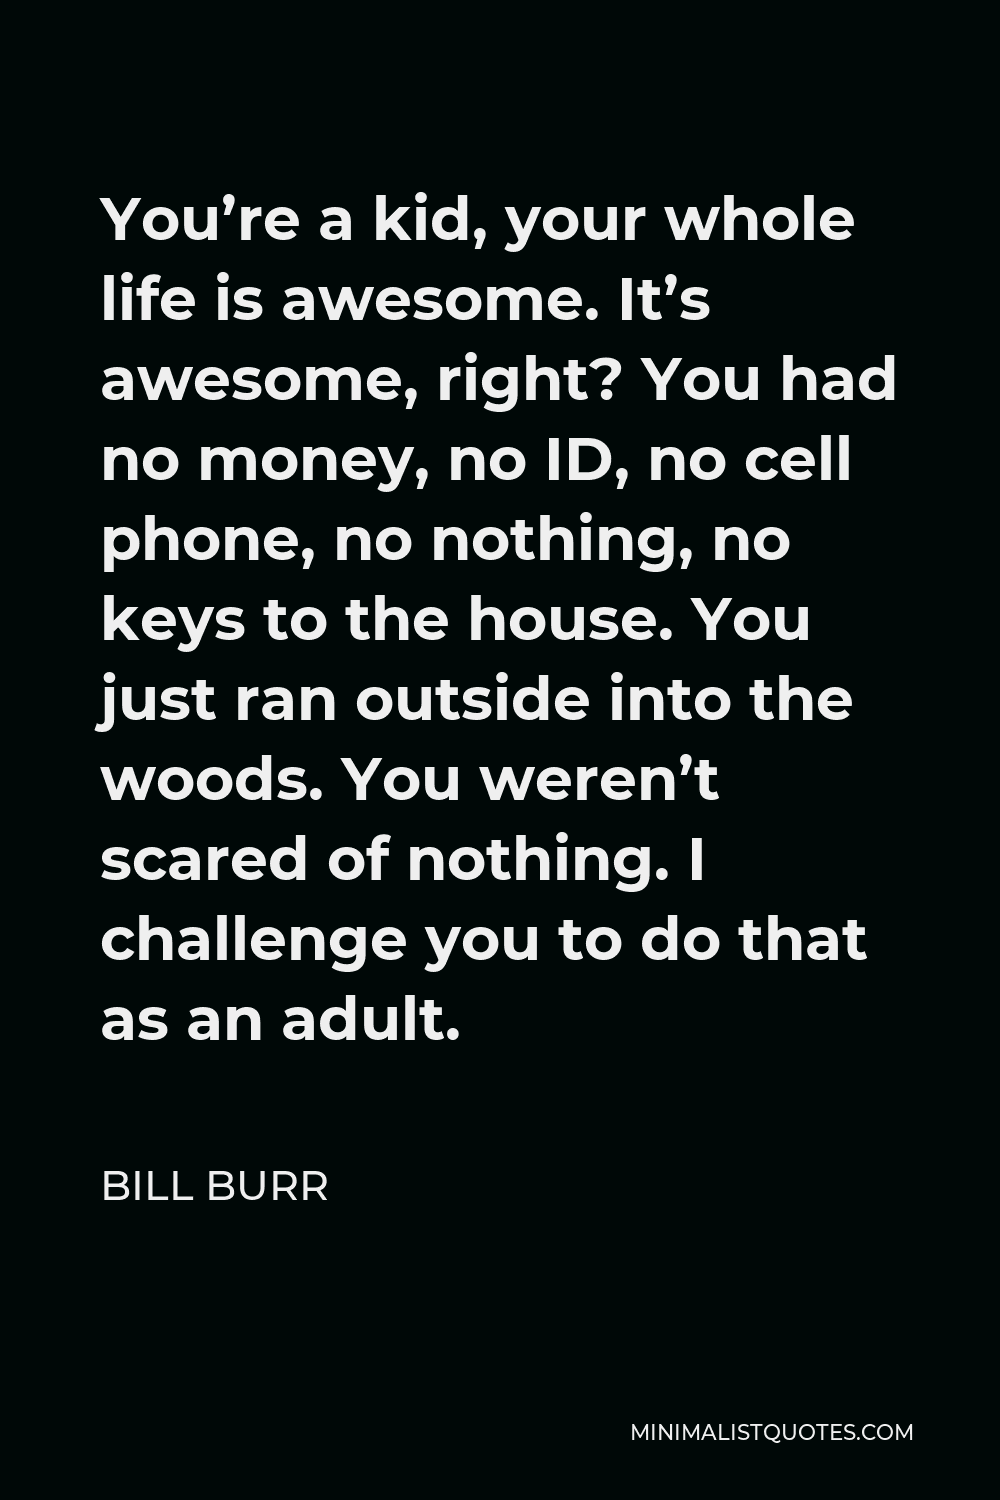 Bill Burr Quote - You’re a kid, your whole life is awesome. It’s awesome, right? You had no money, no ID, no cell phone, no nothing, no keys to the house. You just ran outside into the woods. You weren’t scared of nothing. I challenge you to do that as an adult.